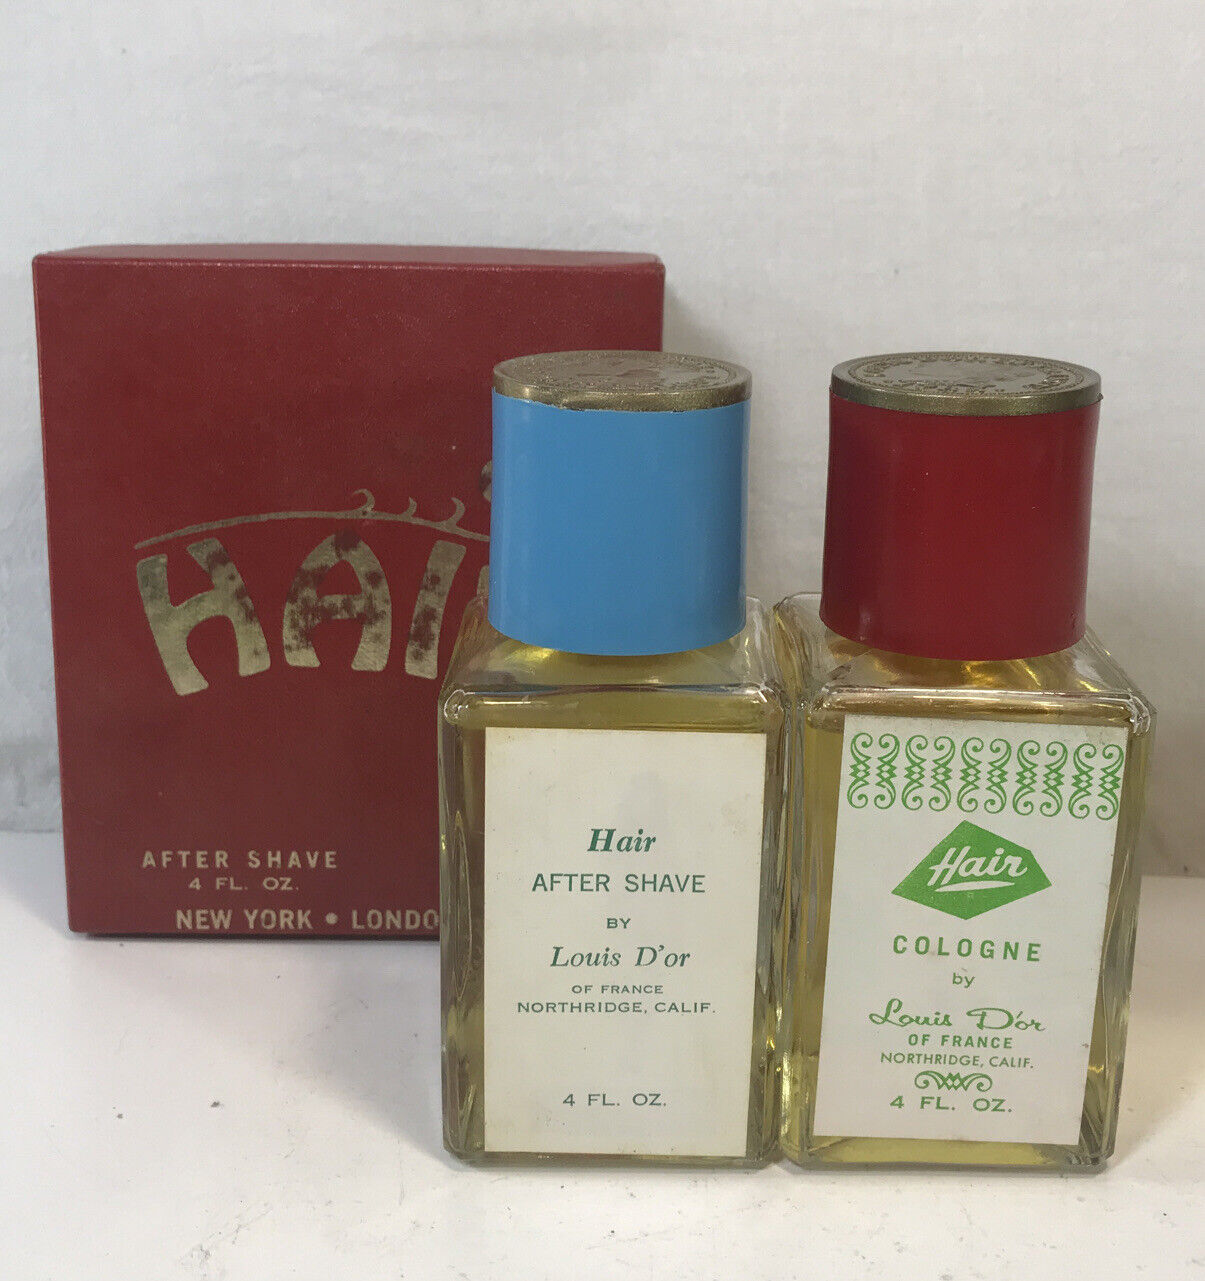 Vtg RARE Hair by Louis D’or After Shave & Cologne with Original Box. See Pics